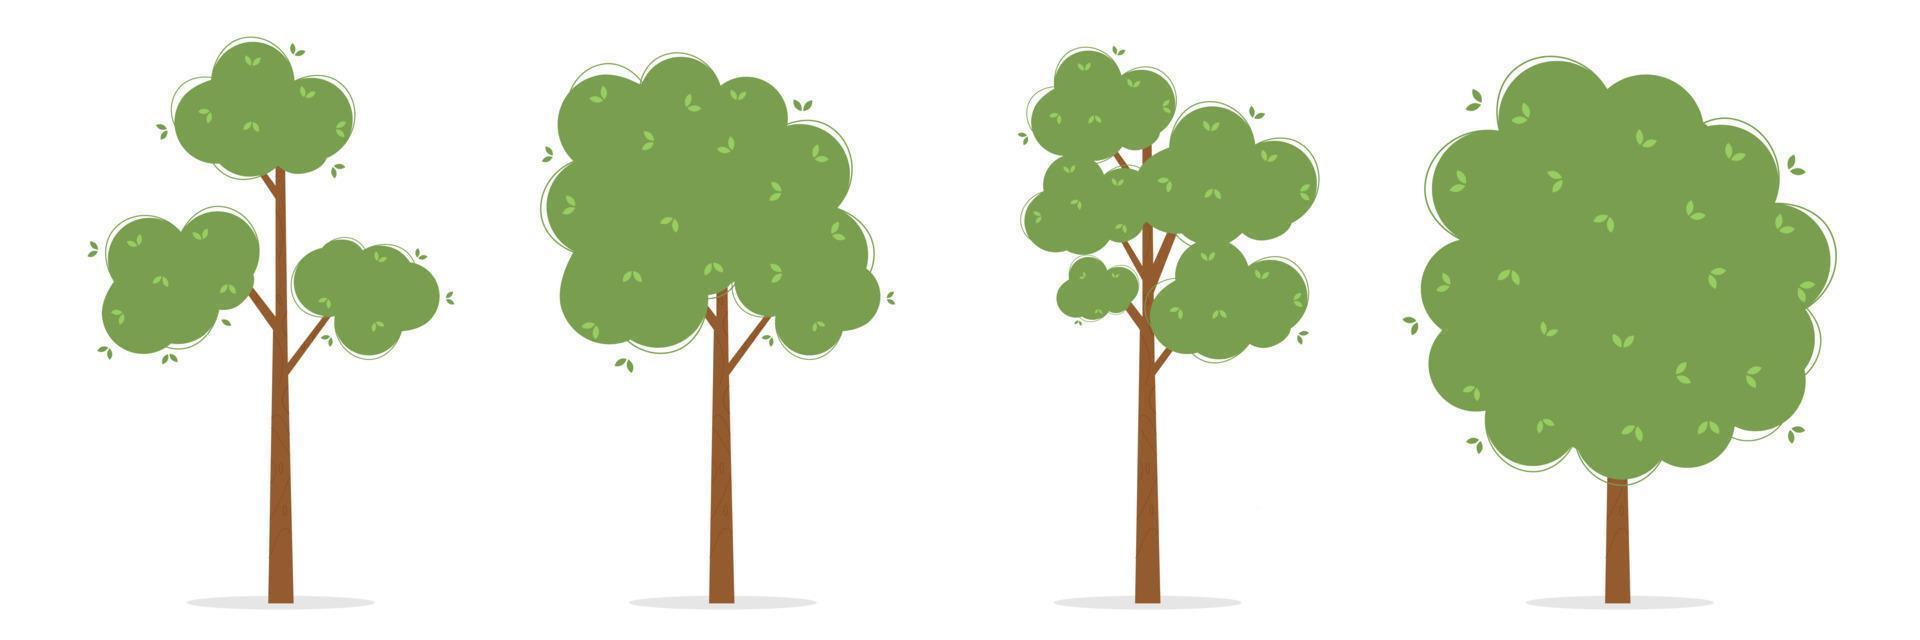 Trees set in flat style. Vector illustration of trees isolated on white background. Nature green spaces for the image of the forest or park, for architectural or landscape design.